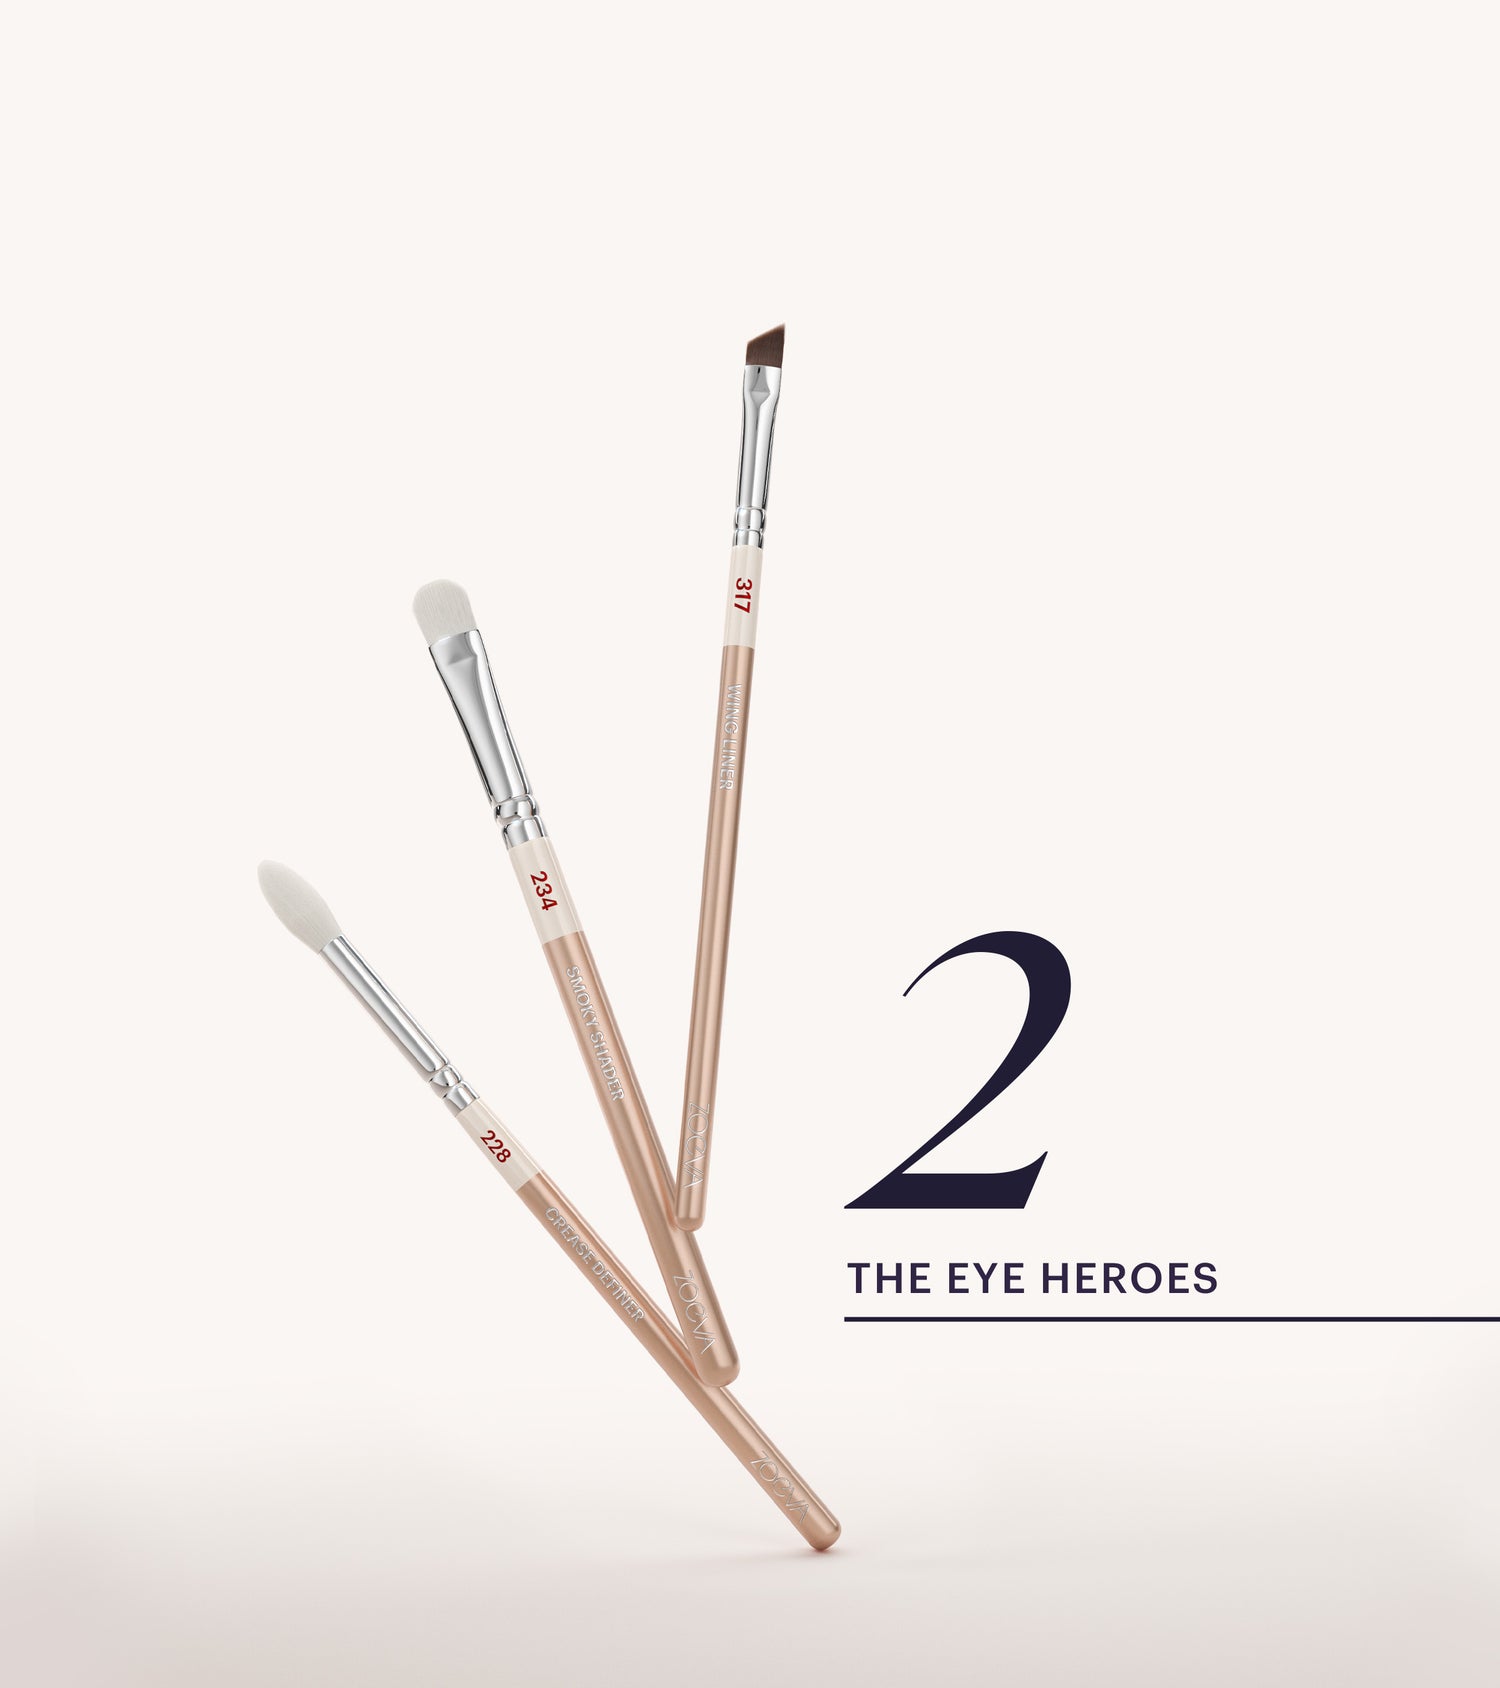 ZOEVA - The Complete Pinselset (Champagne) - BRUSH SET